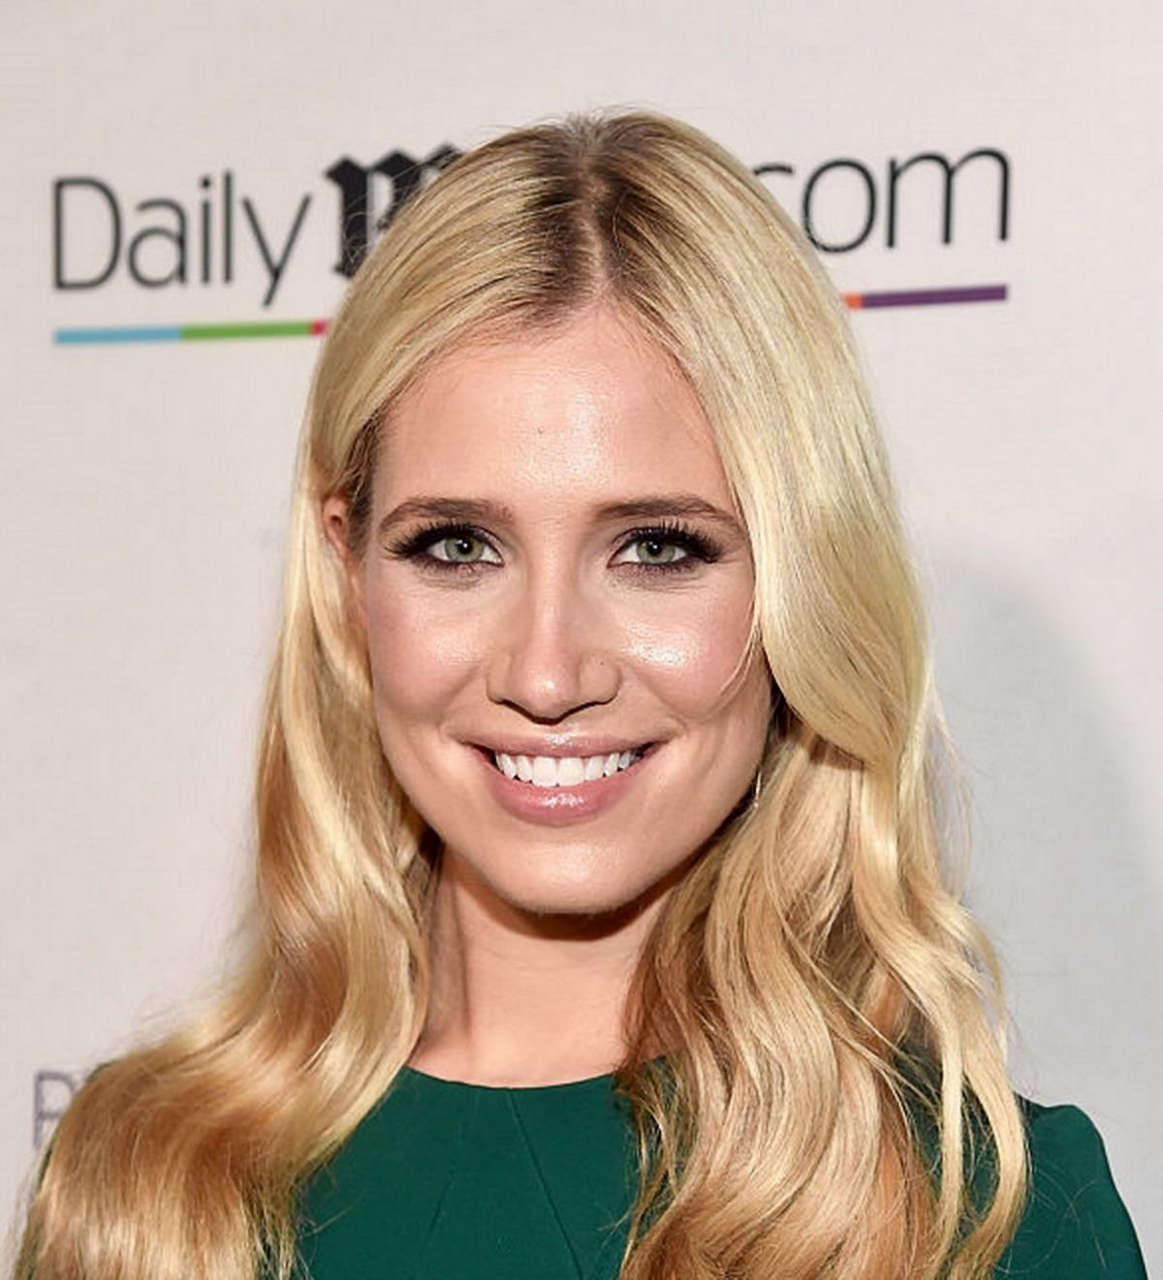 Kristine Leahy Dailymail S People S Choice Awards After Party Los Angeles